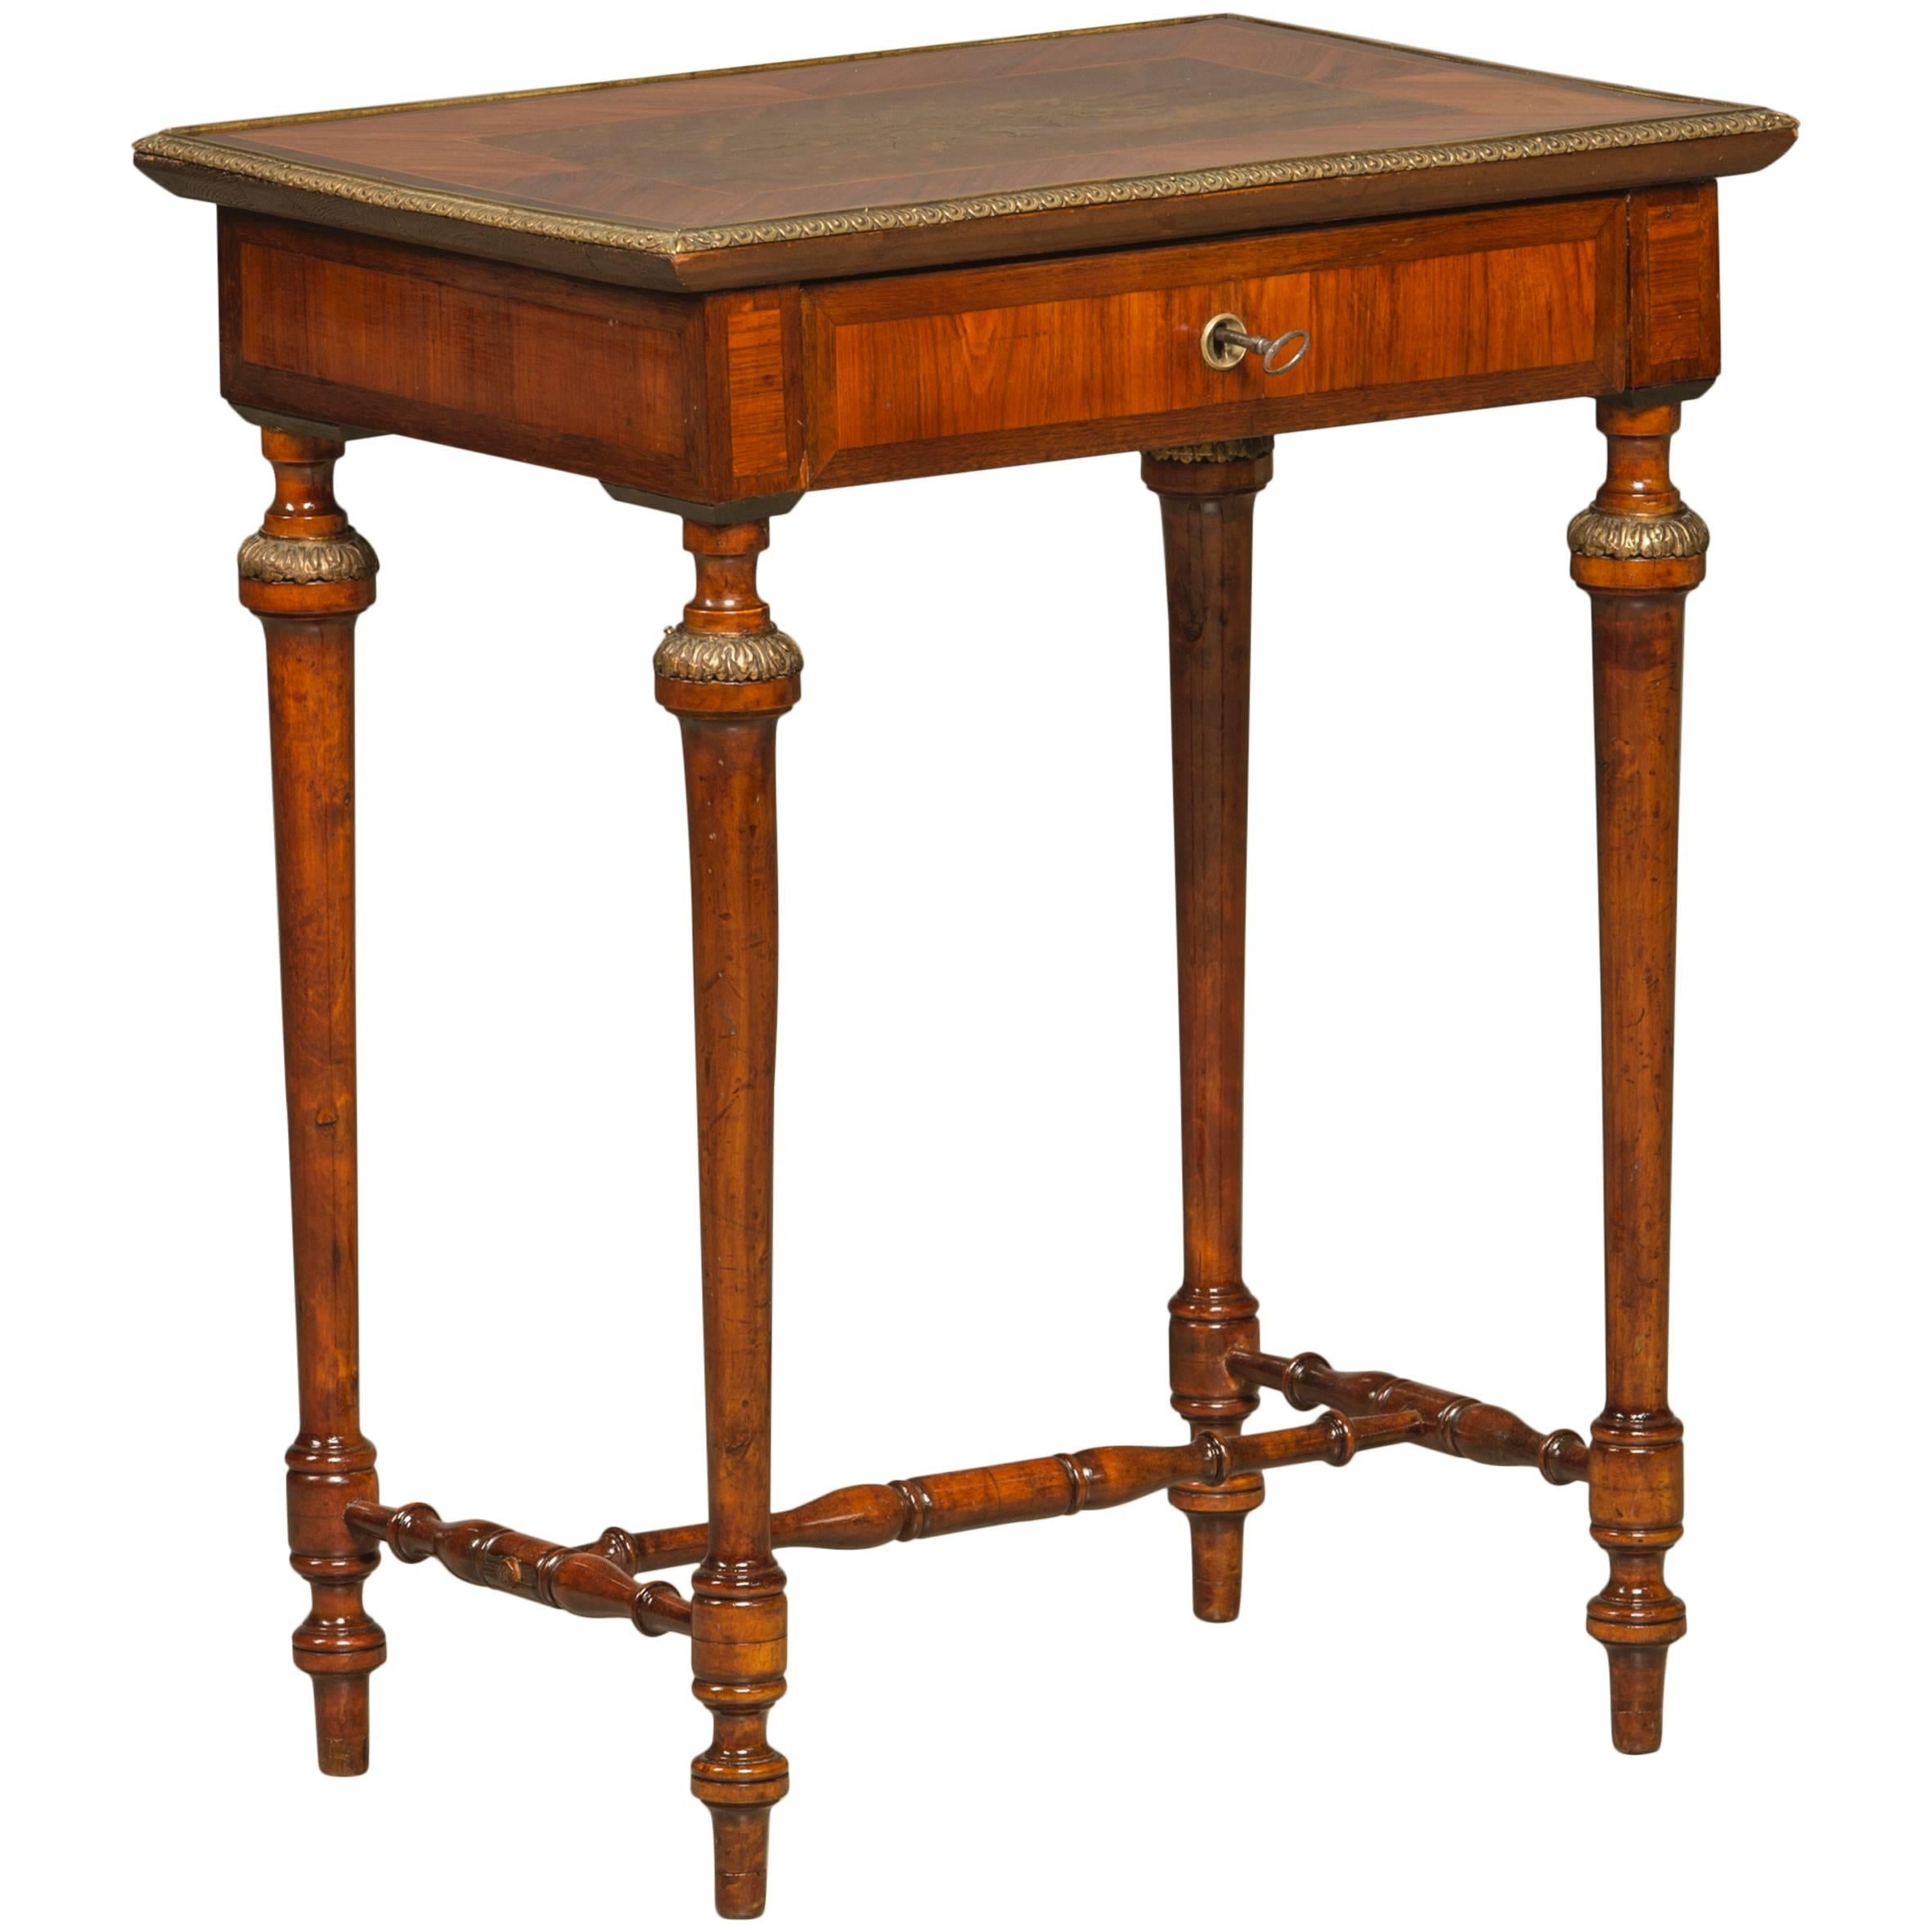 Mid-19th Century Napoleon III Lamp Table with Brass Inlays and Bronze Lists